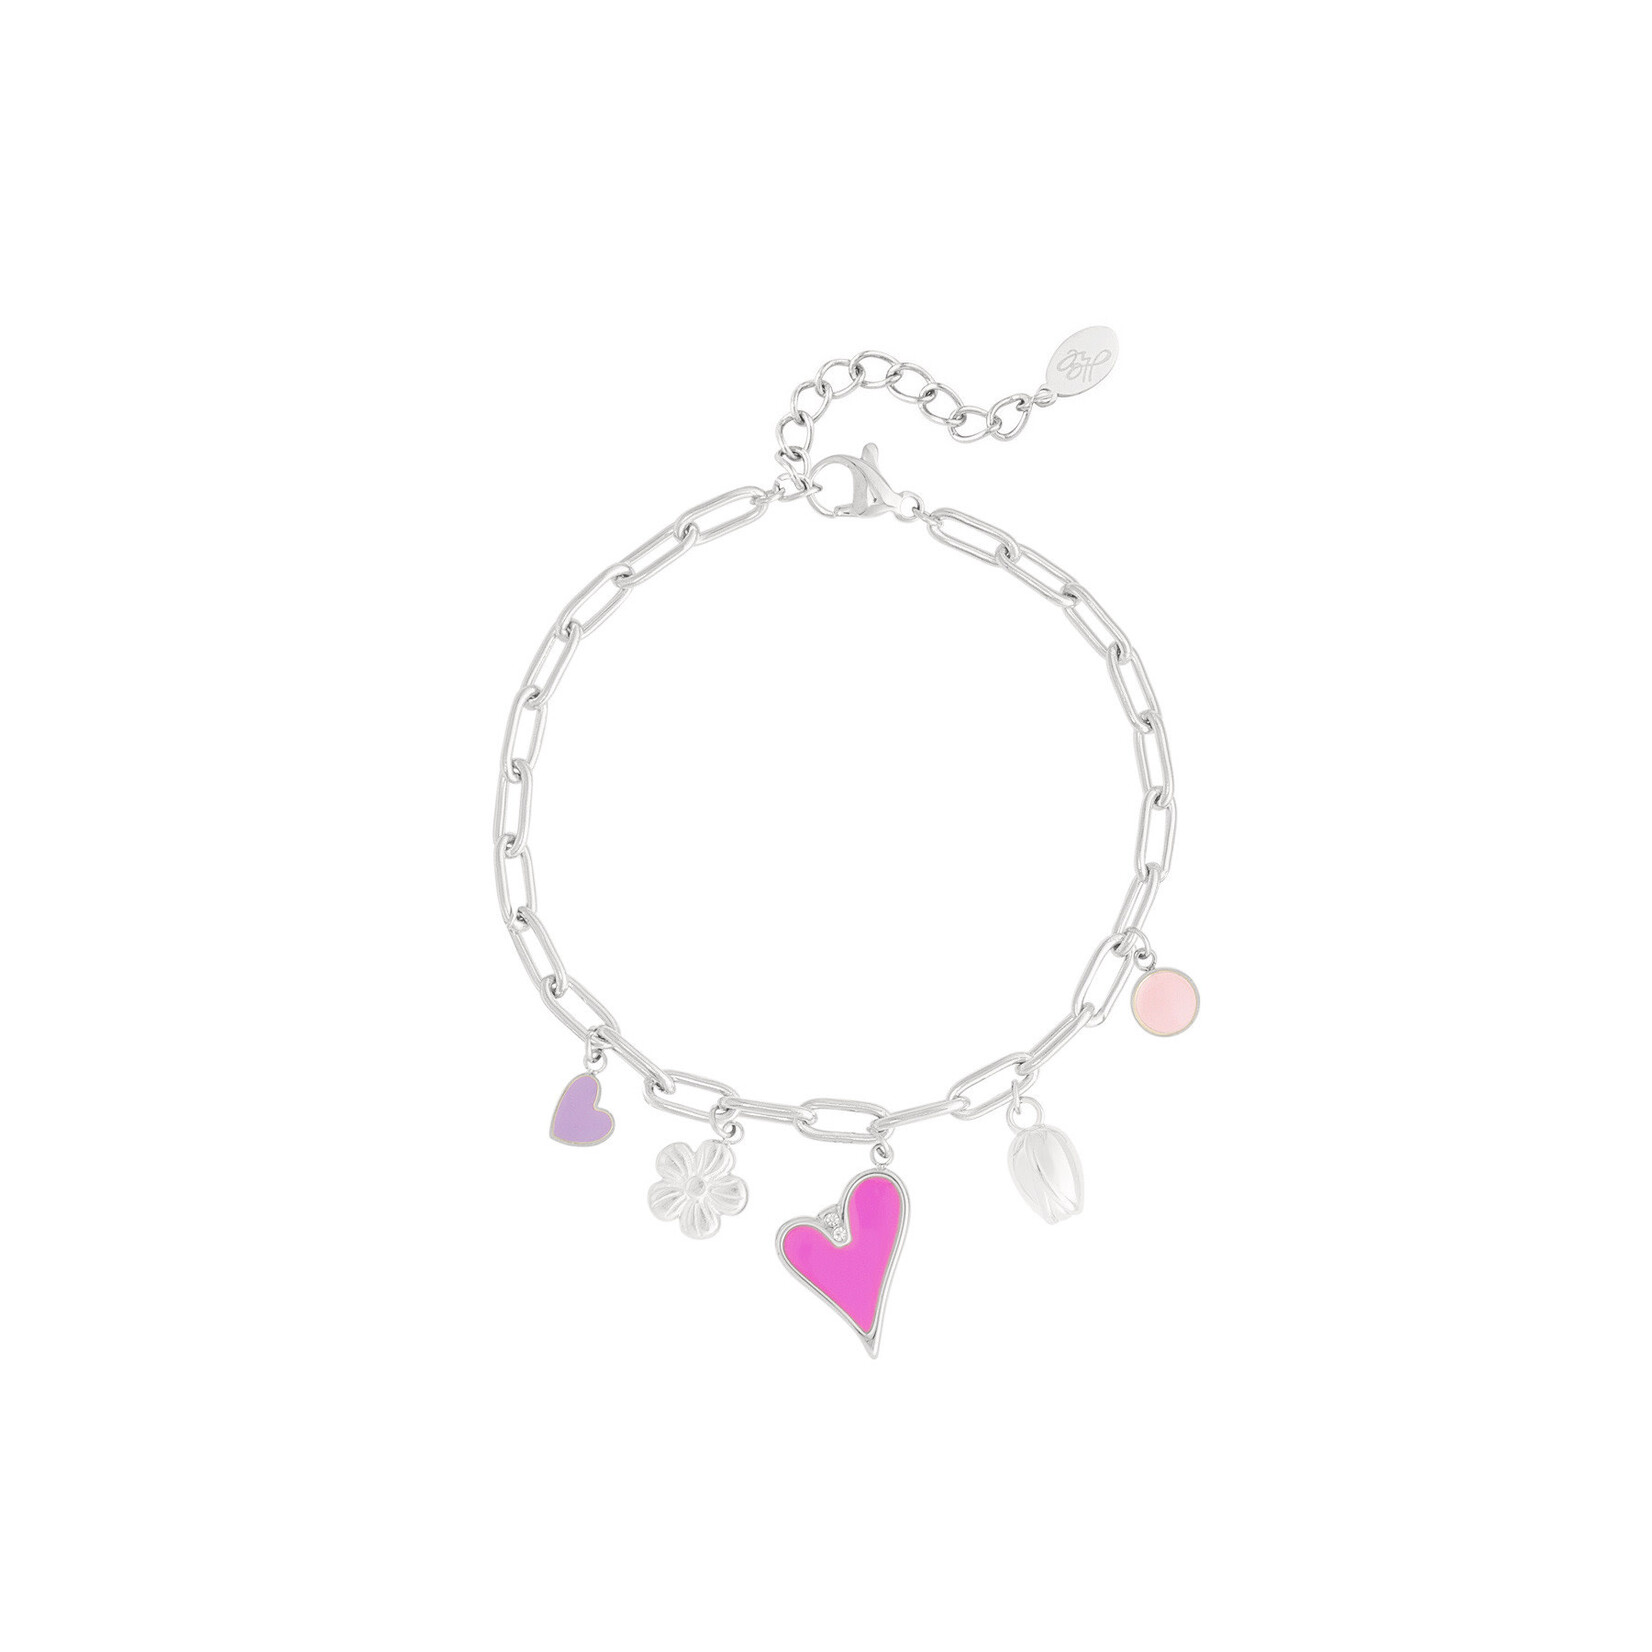 More the Firm Armband pink charms